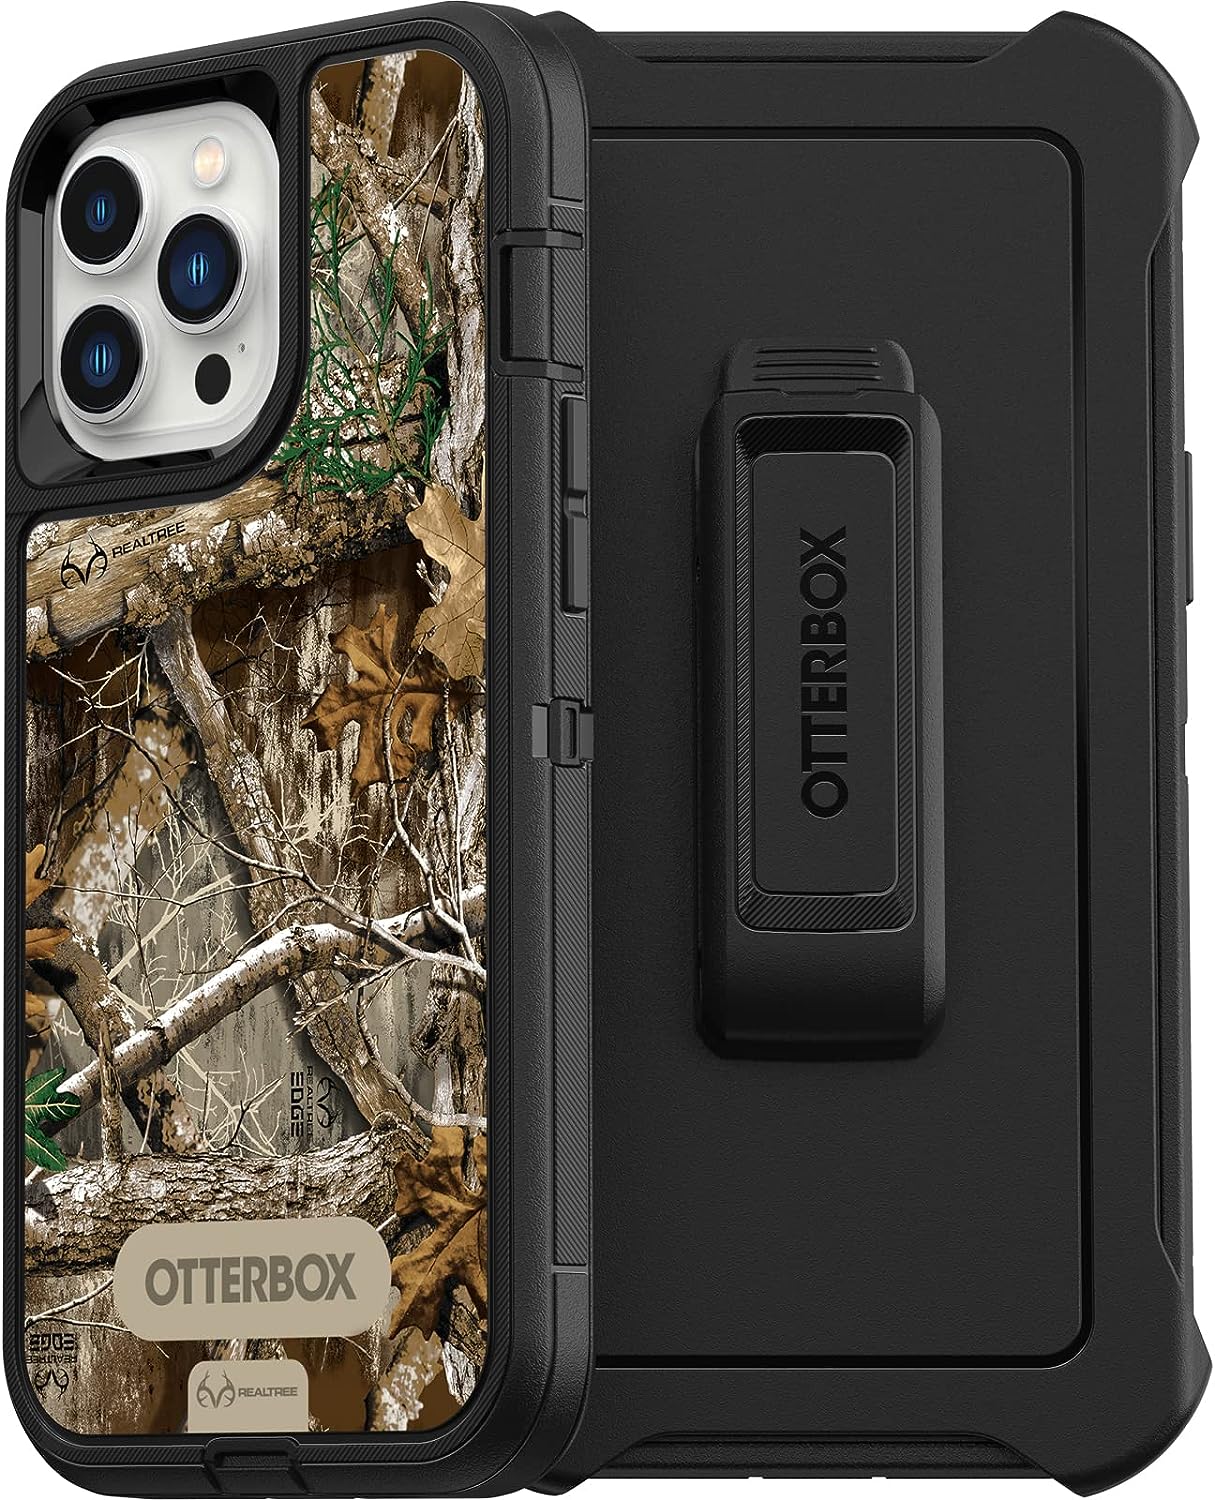 OtterBox DEFENDER SERIES Case for iPhone 12 Pro Max - RealTree Edge Black (Certified Refurbished)